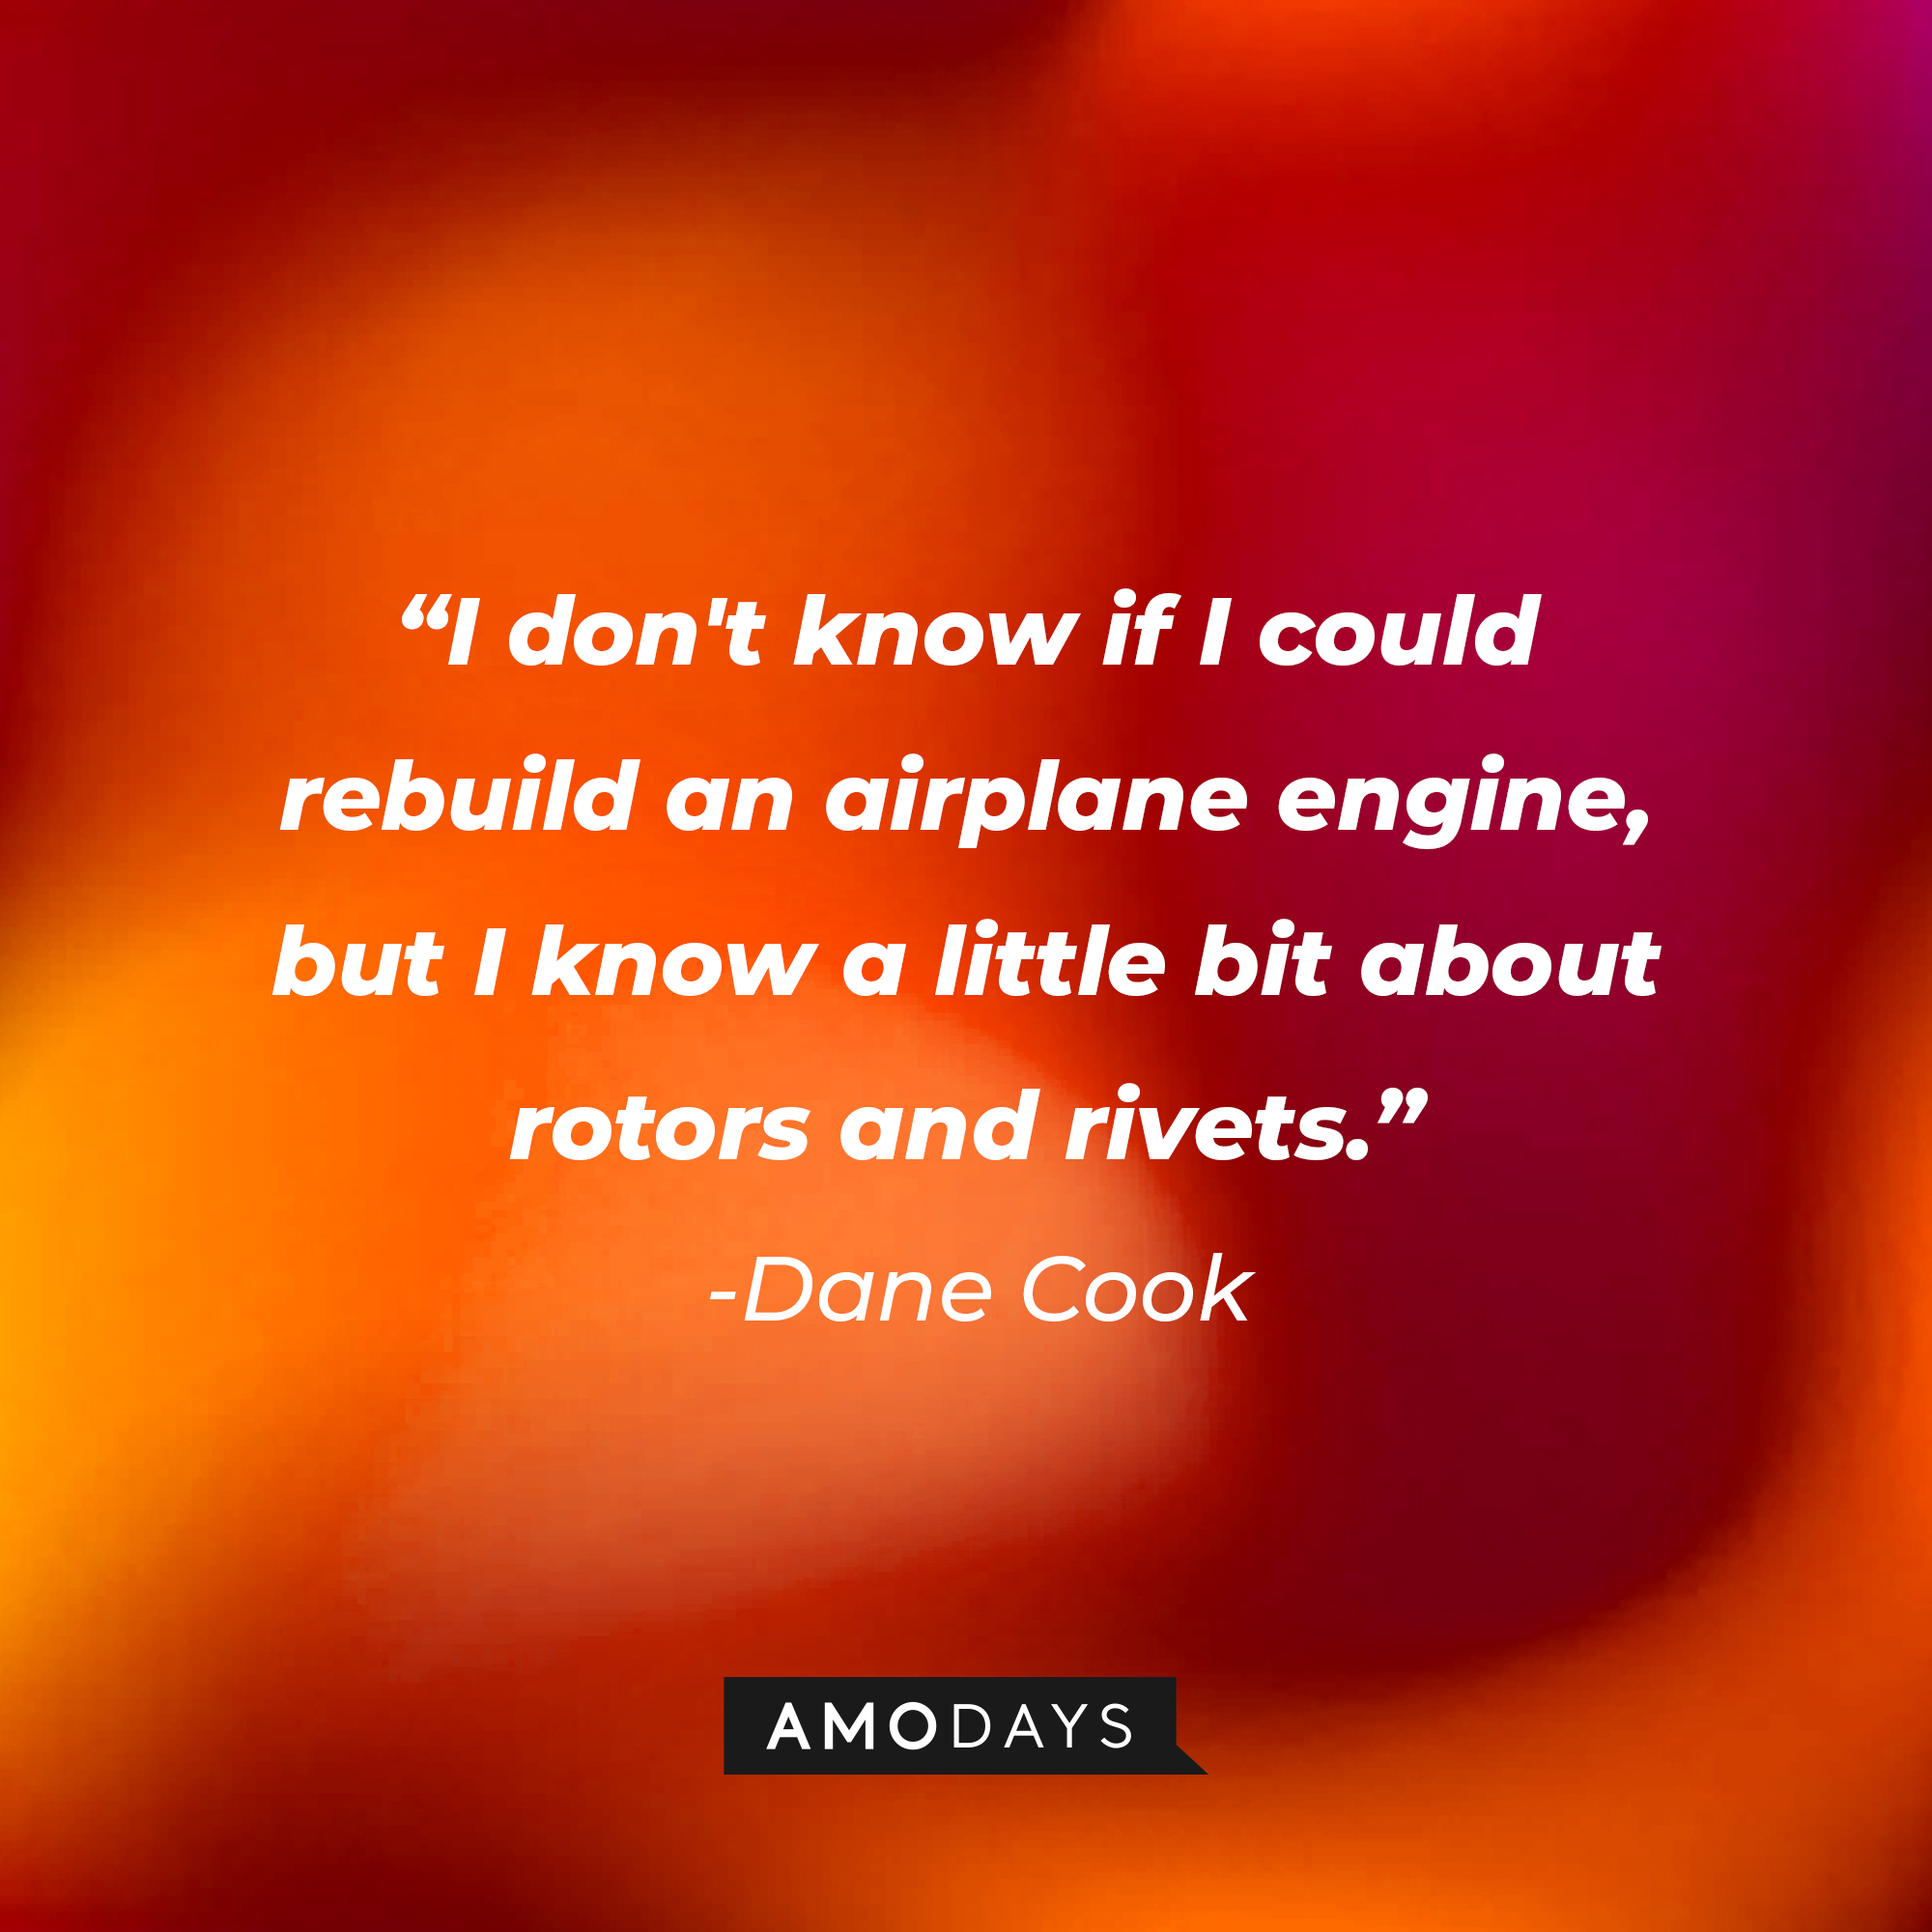 Dane Cook's quote: "I don't know if I could rebuild an airplane engine, but I know a little bit about rotors and rivets.” | Source: Amodays